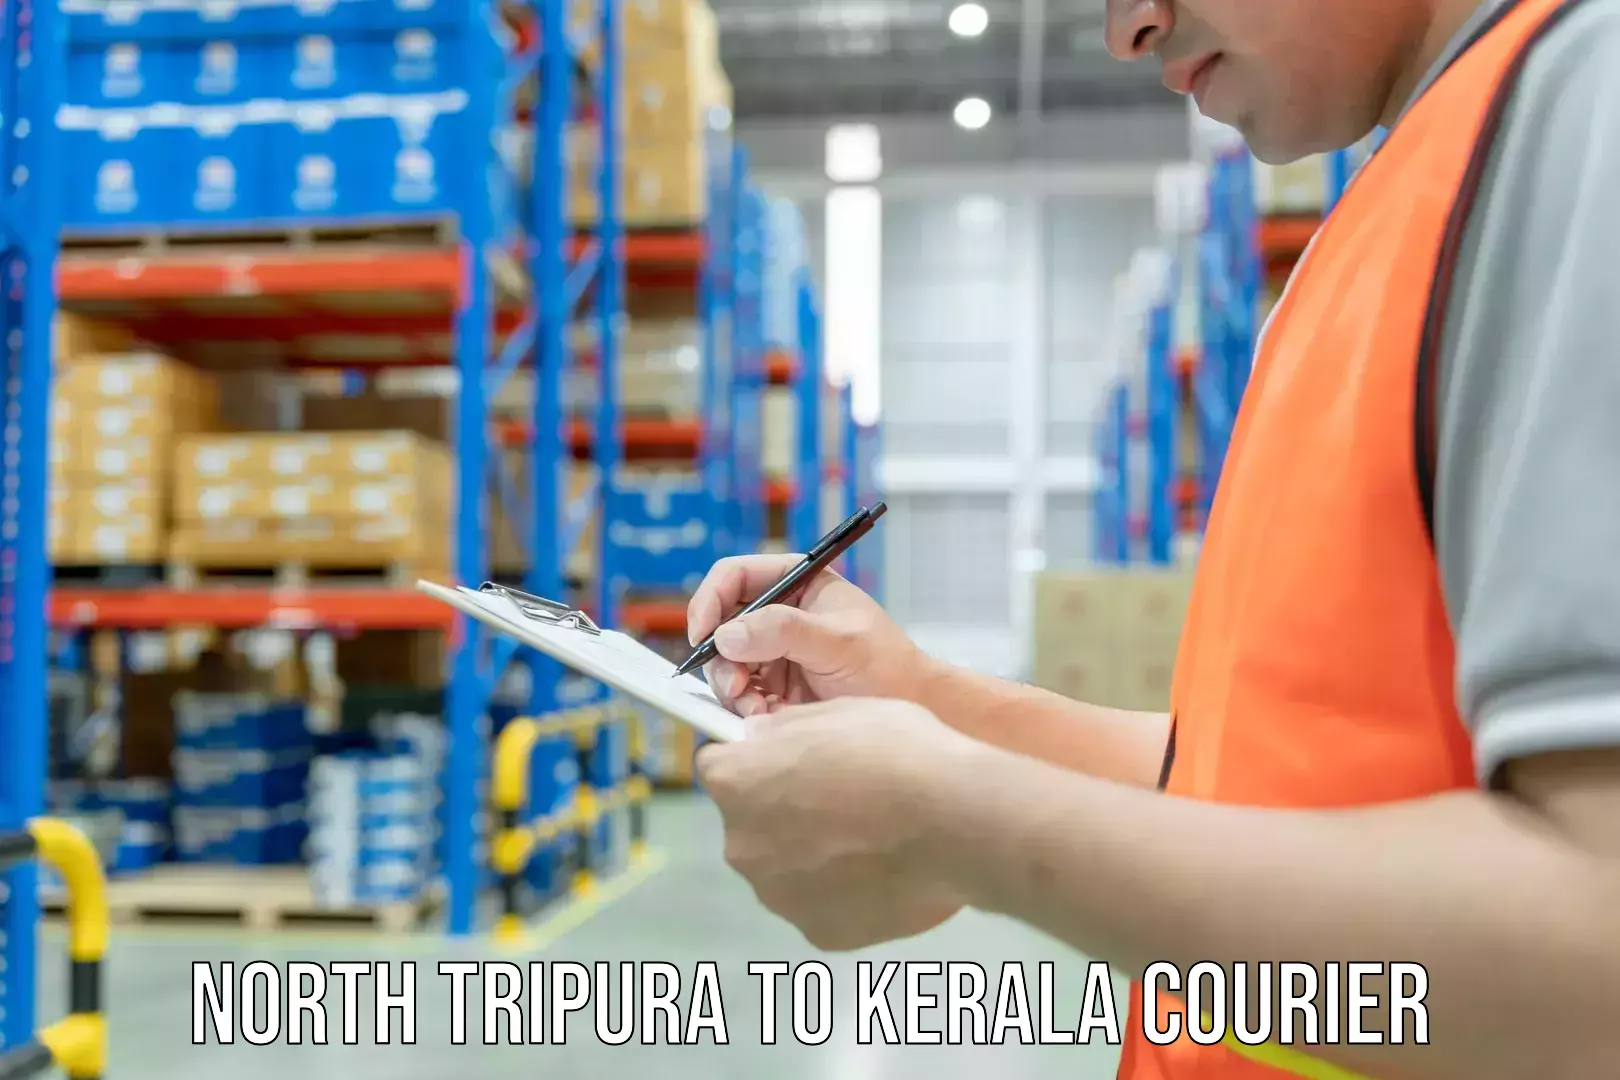 Courier app North Tripura to Kerala